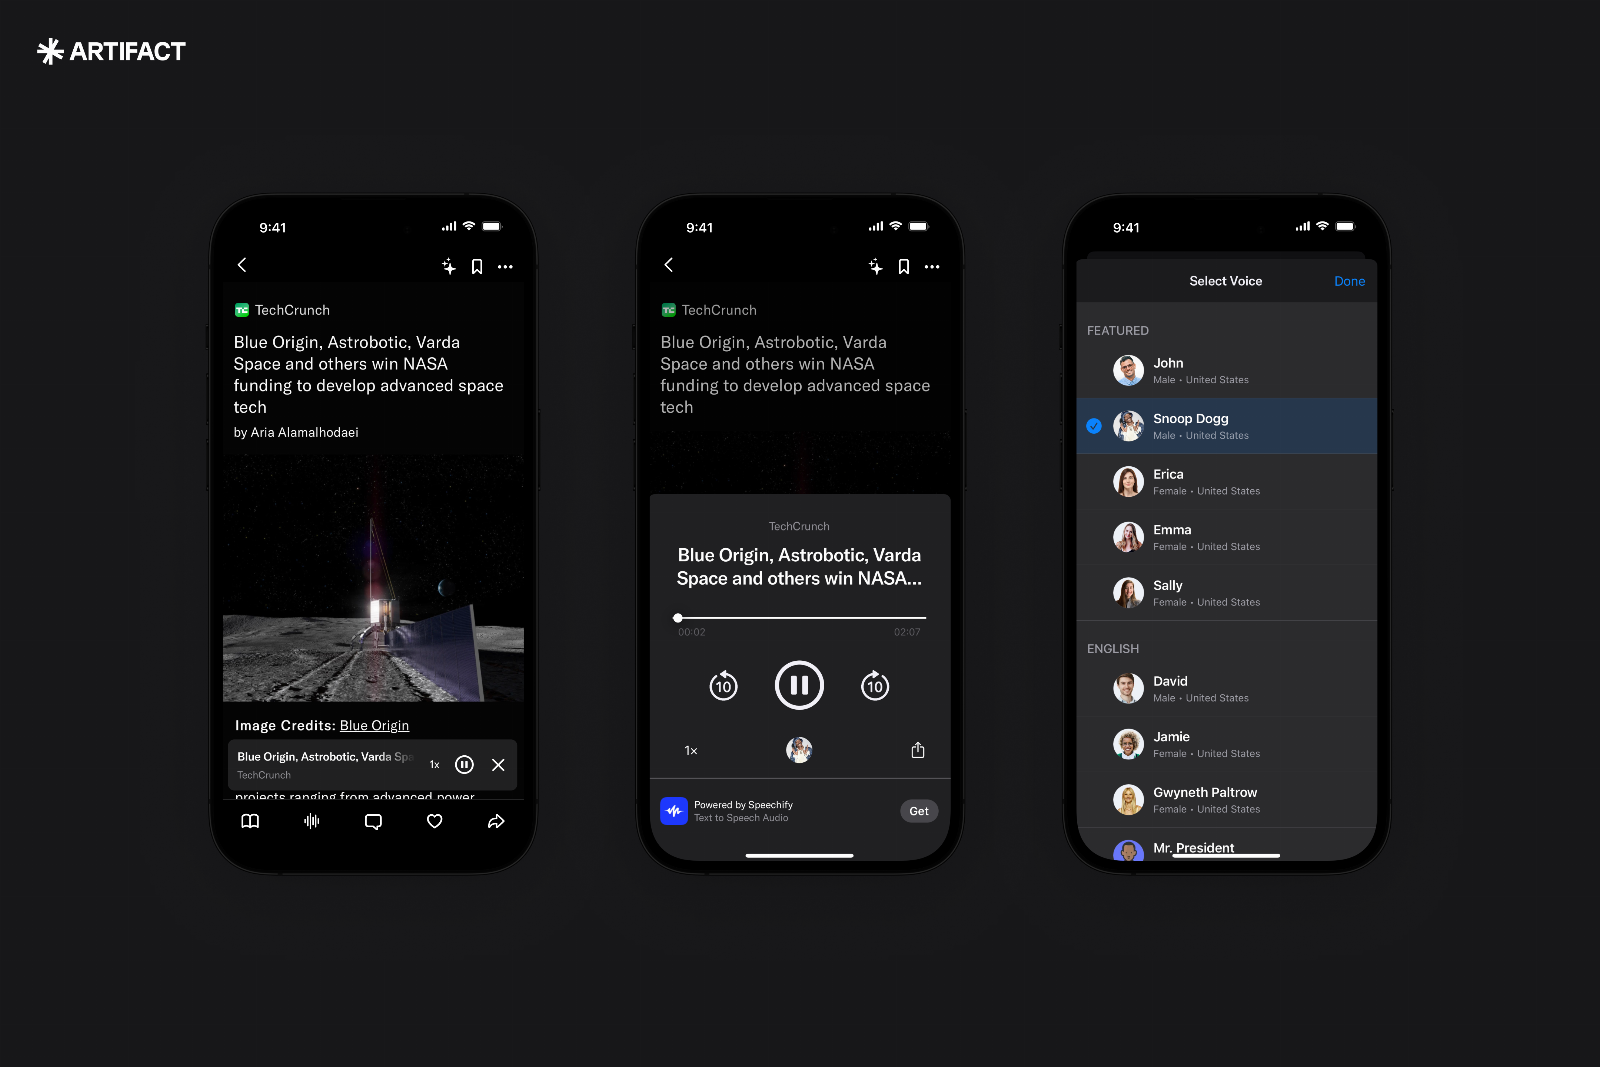 News app Artifact adds AI text-to-speech voices, including Snoop Dogg and Gwyneth Paltrow